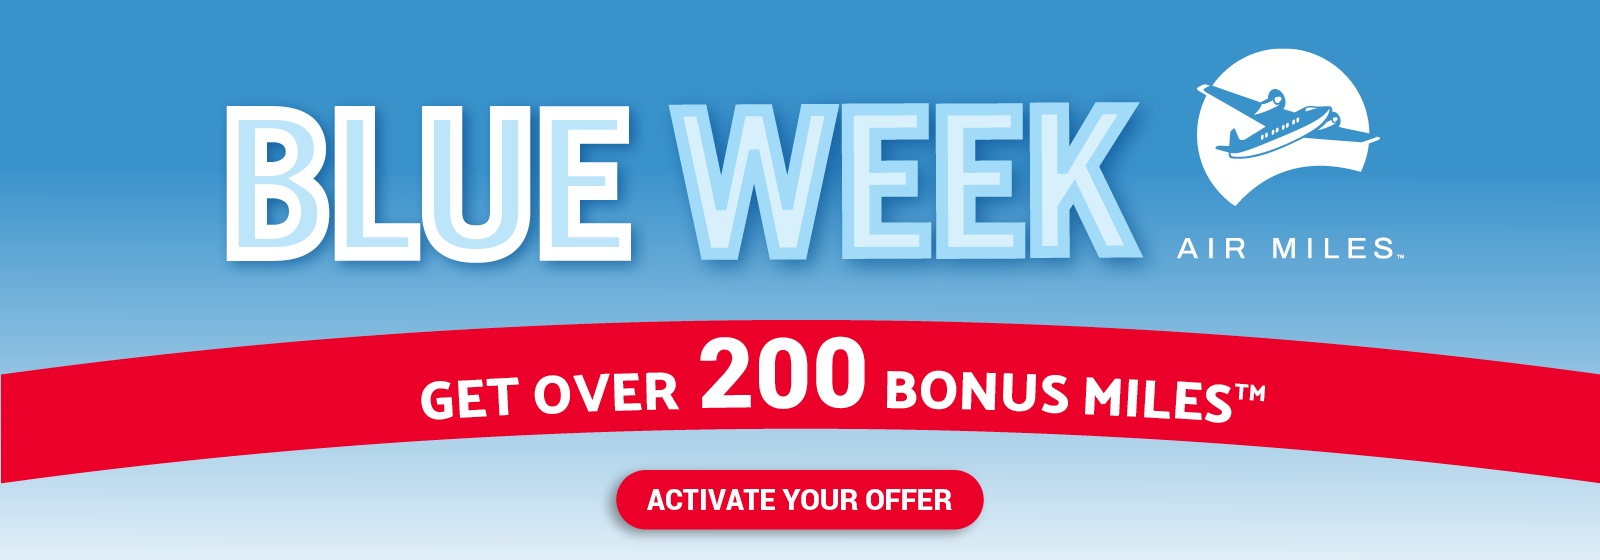 Text Reading 'Blue week Air Miles. Get over 200 bonus miles. 'Activate your offer' at the button given below.'